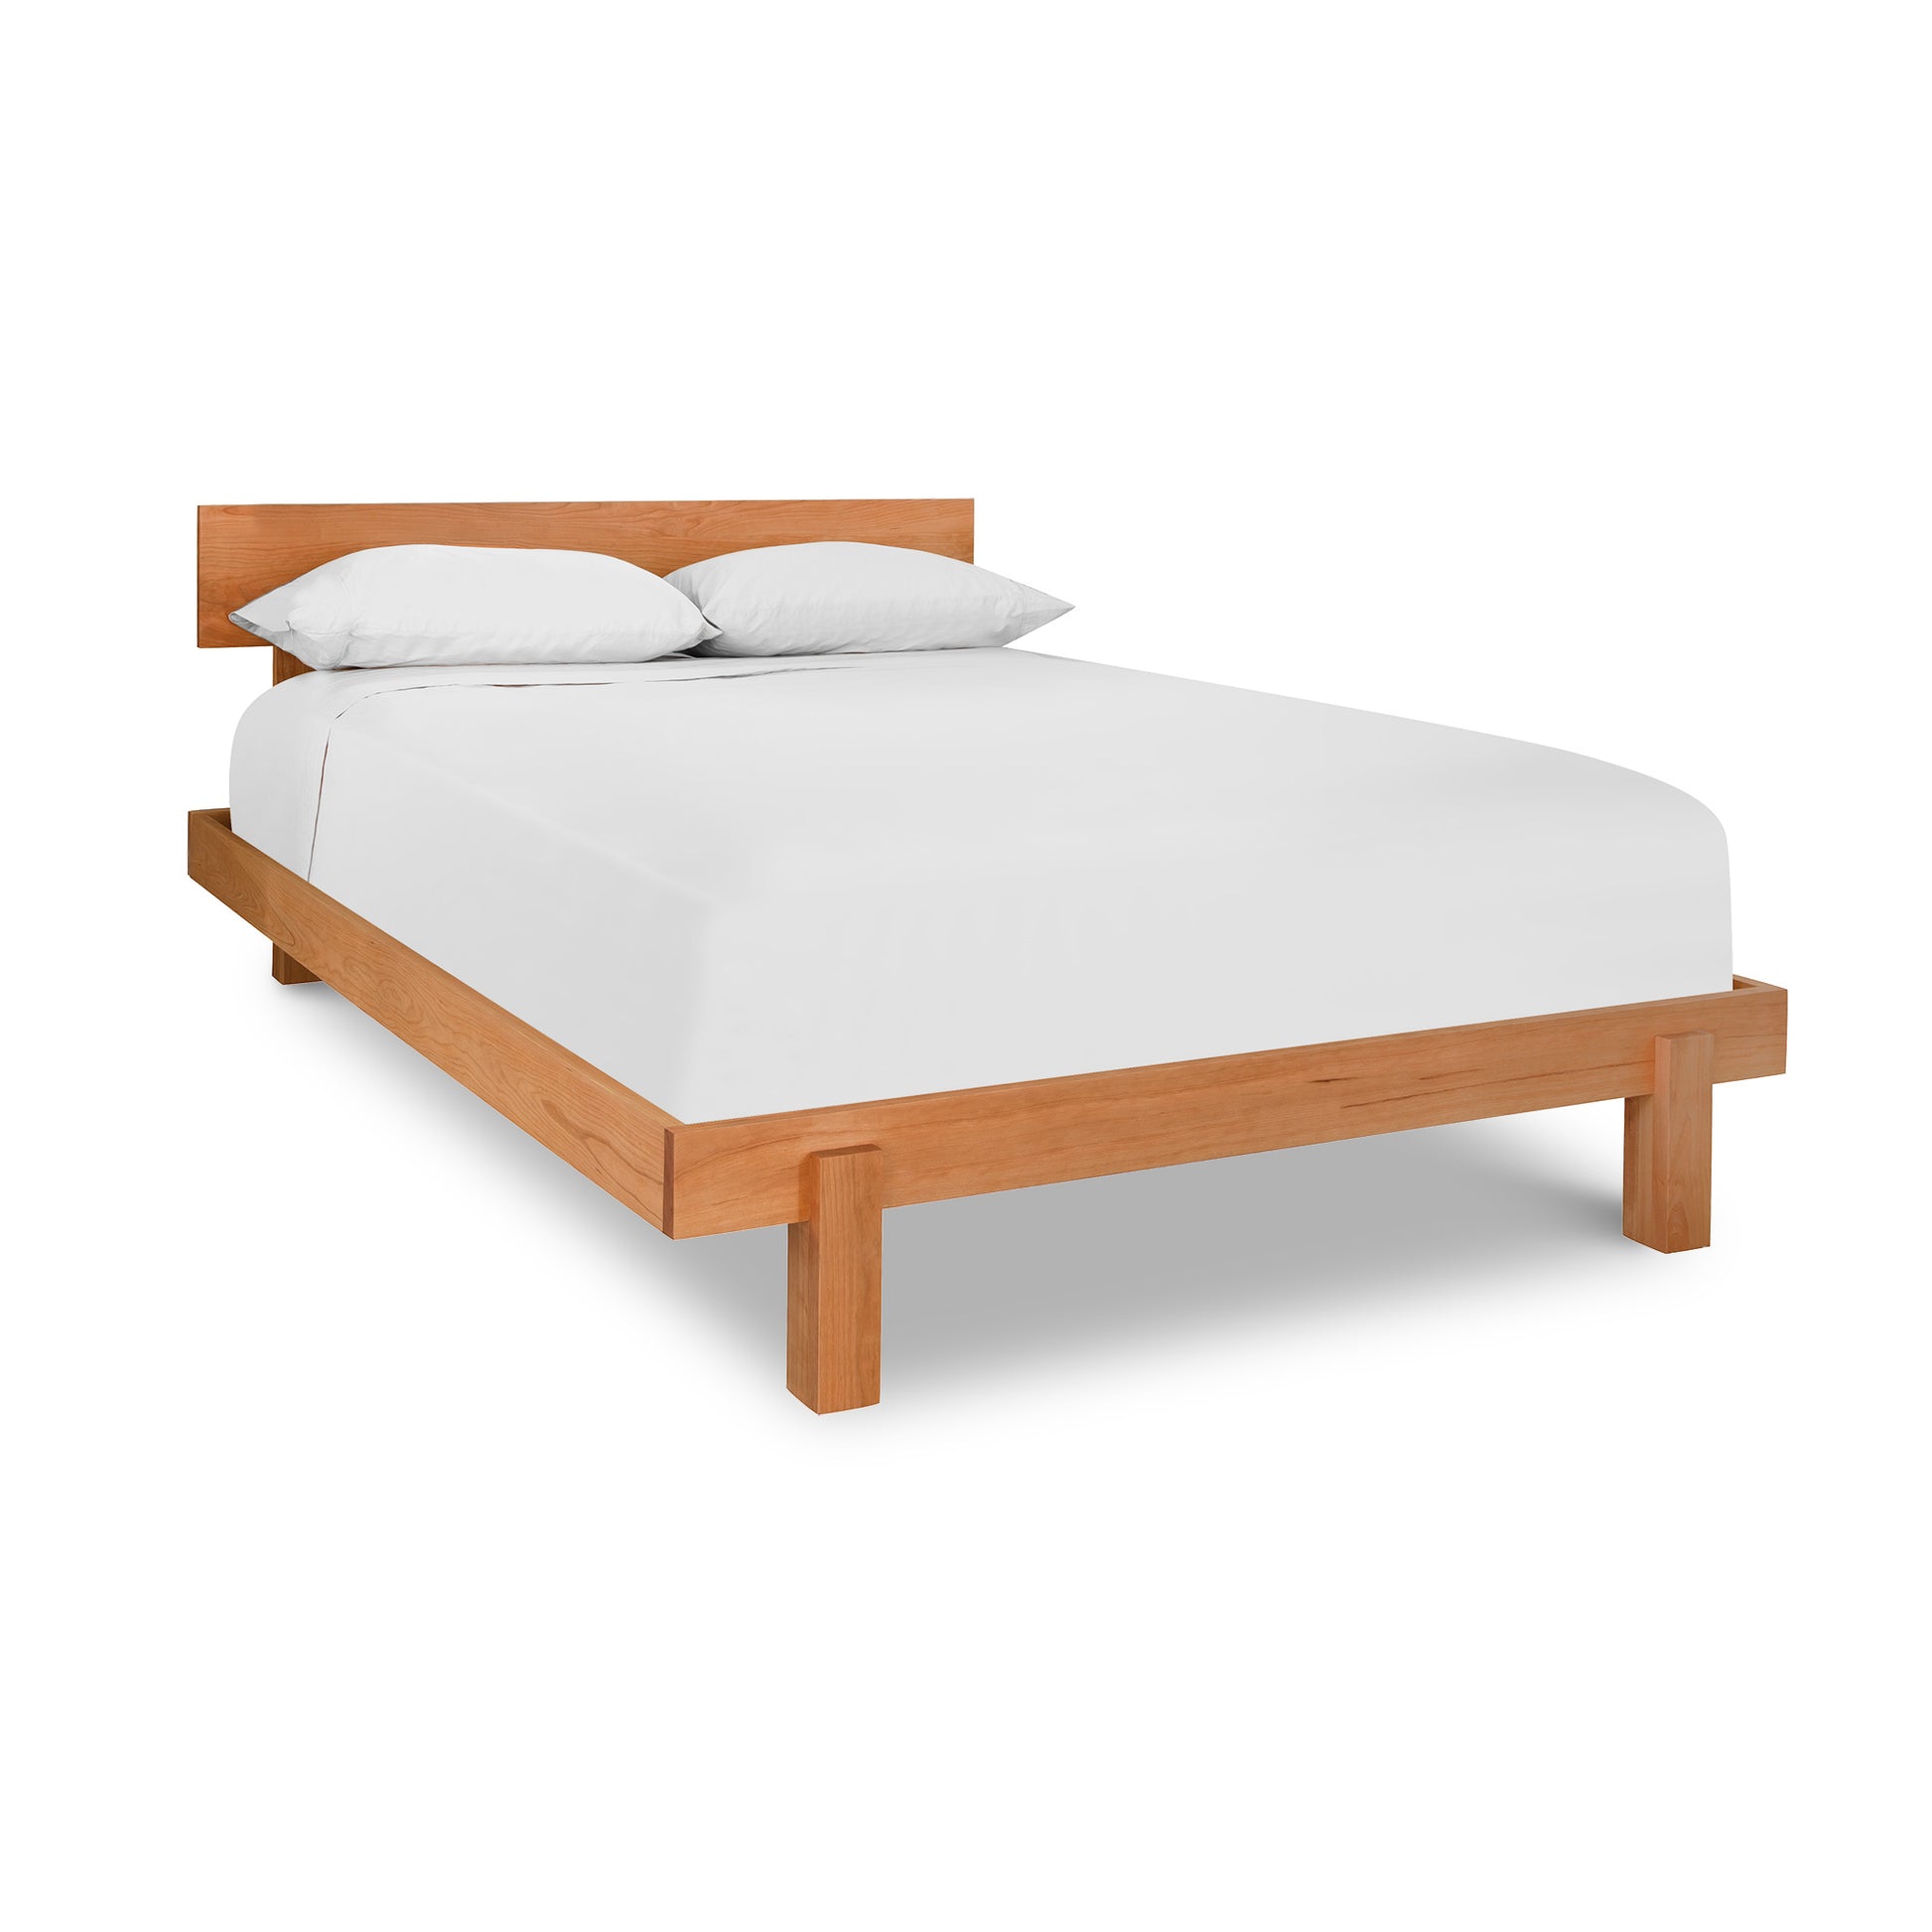 A solid wood Vermont Furniture Designs Kipling Platform Bed frame with a white Vermont Furniture Designs mattress and two Vermont Furniture Designs pillows against a white background.